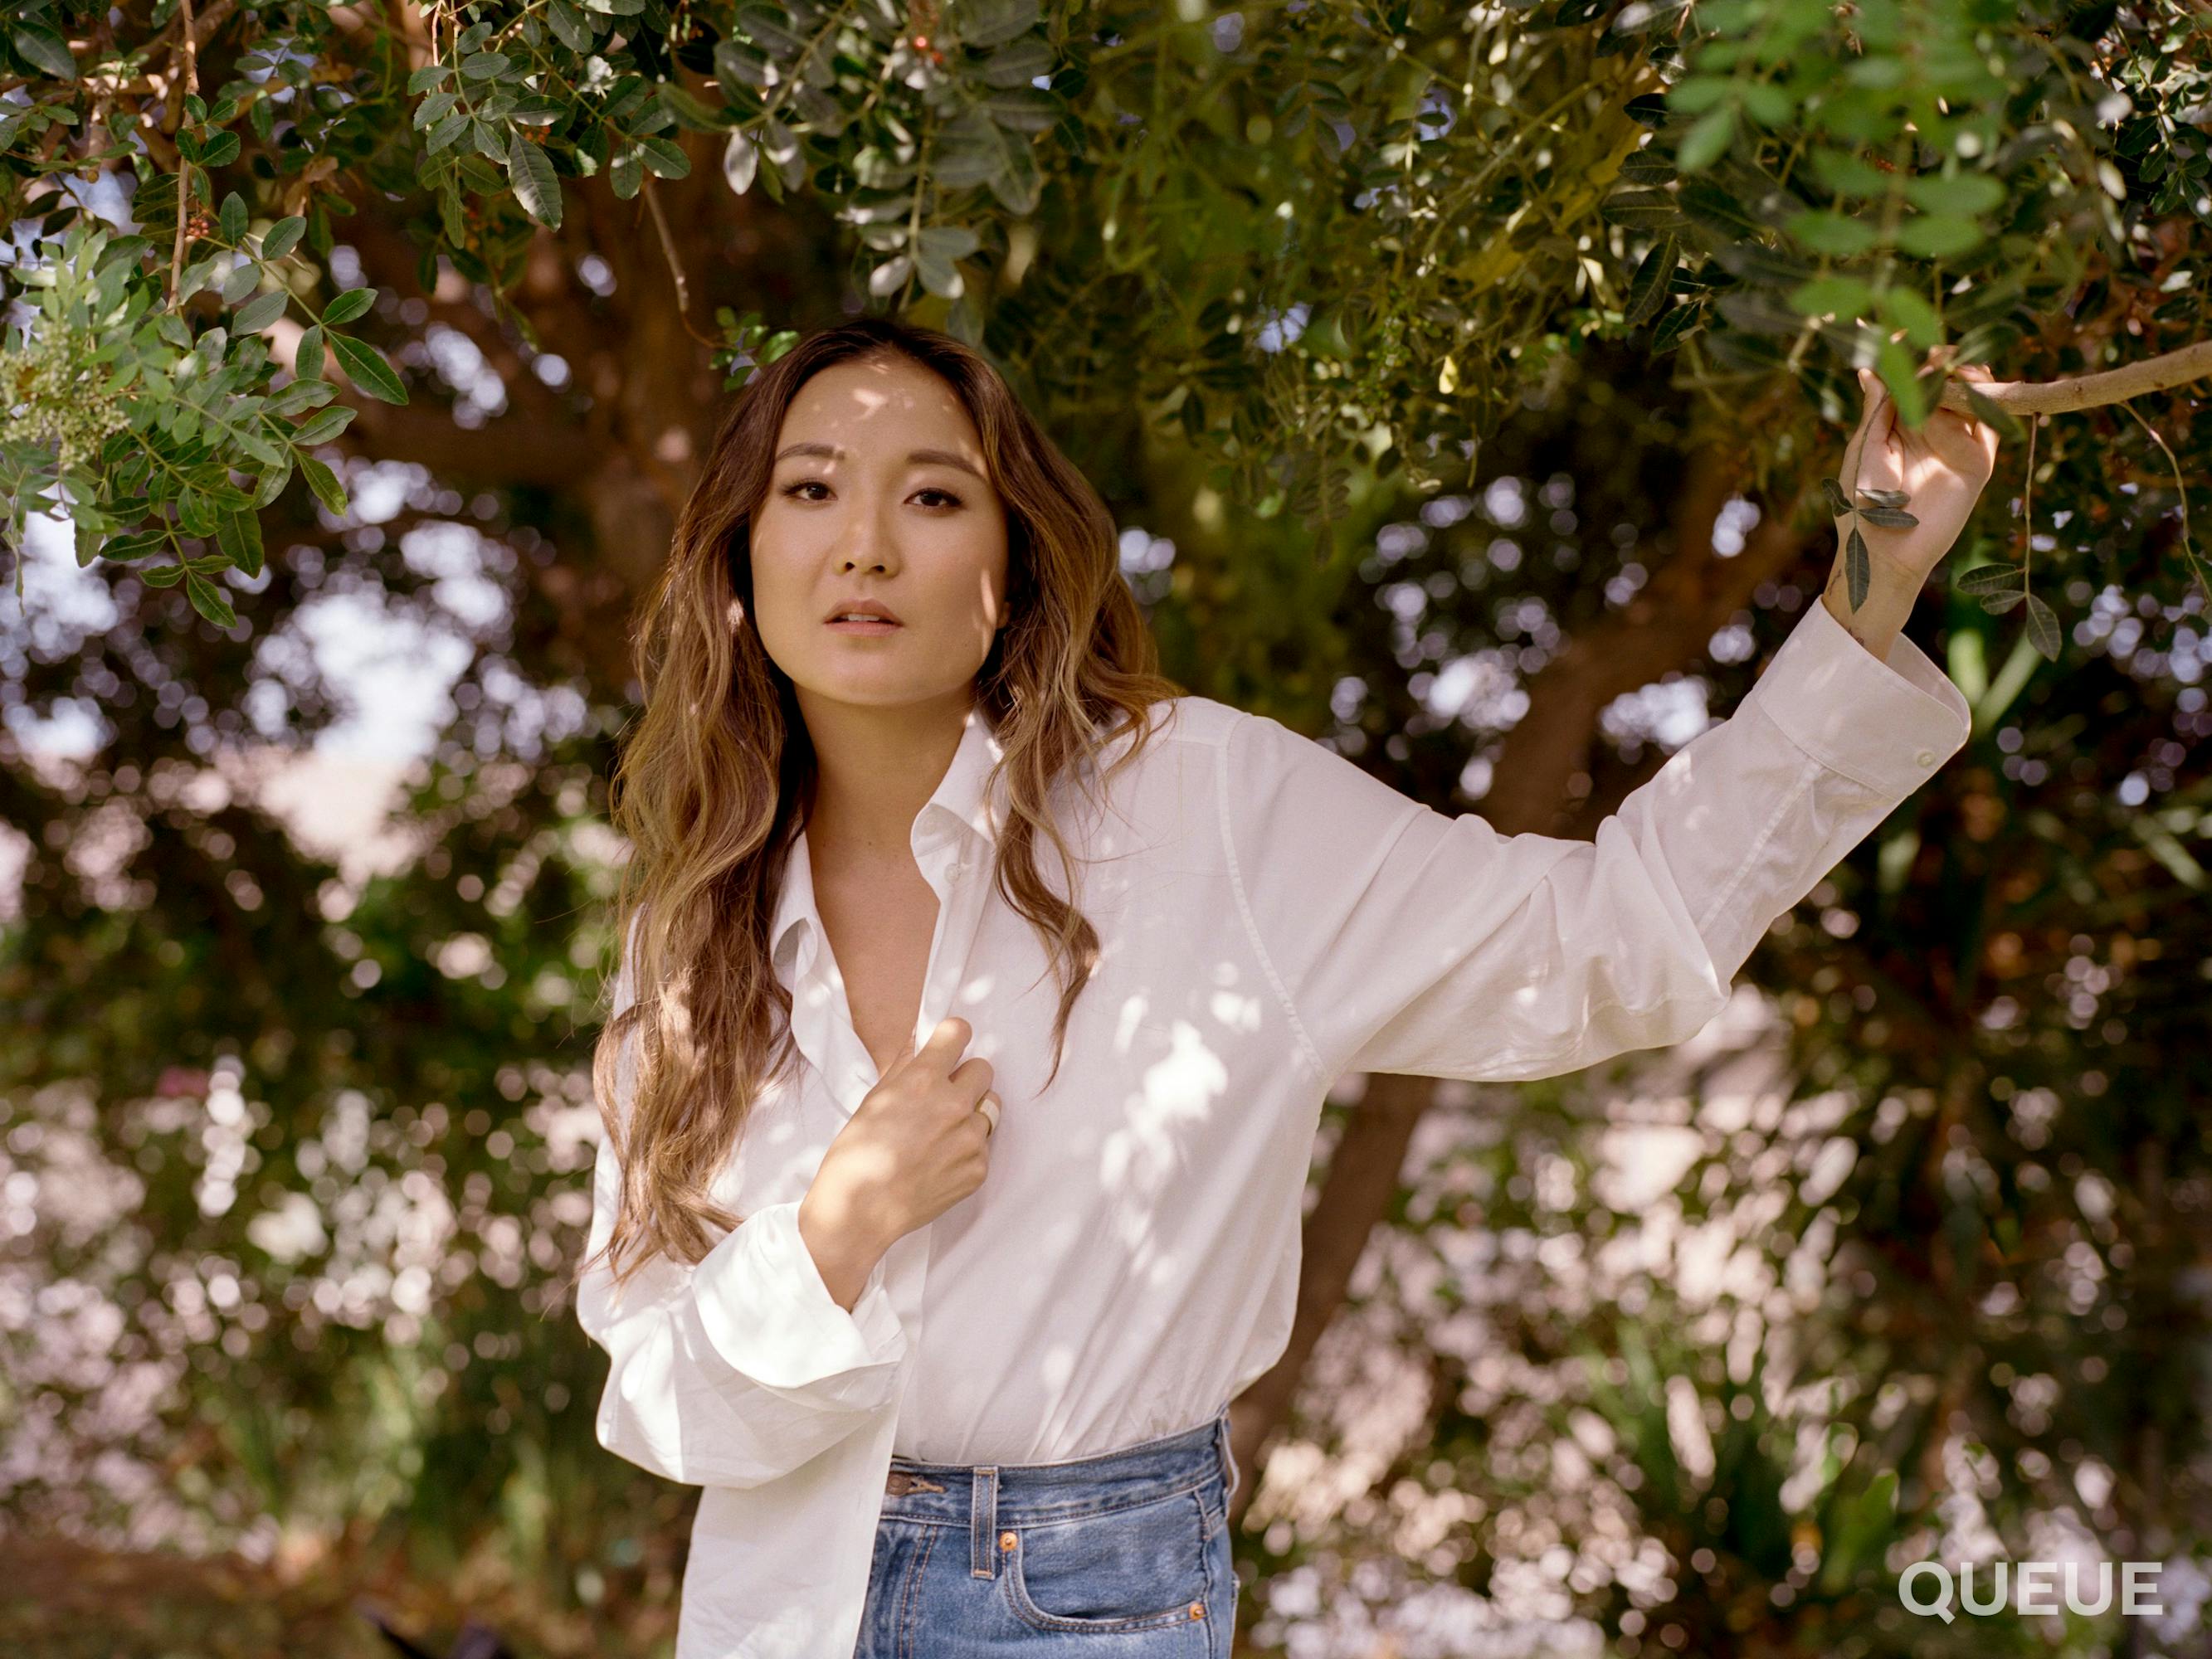 Ashley Park wears a white buttoned down, jeans, and her hair falls in loose curls. She holds the branch of a leafy tree as she looks directly at the camera.